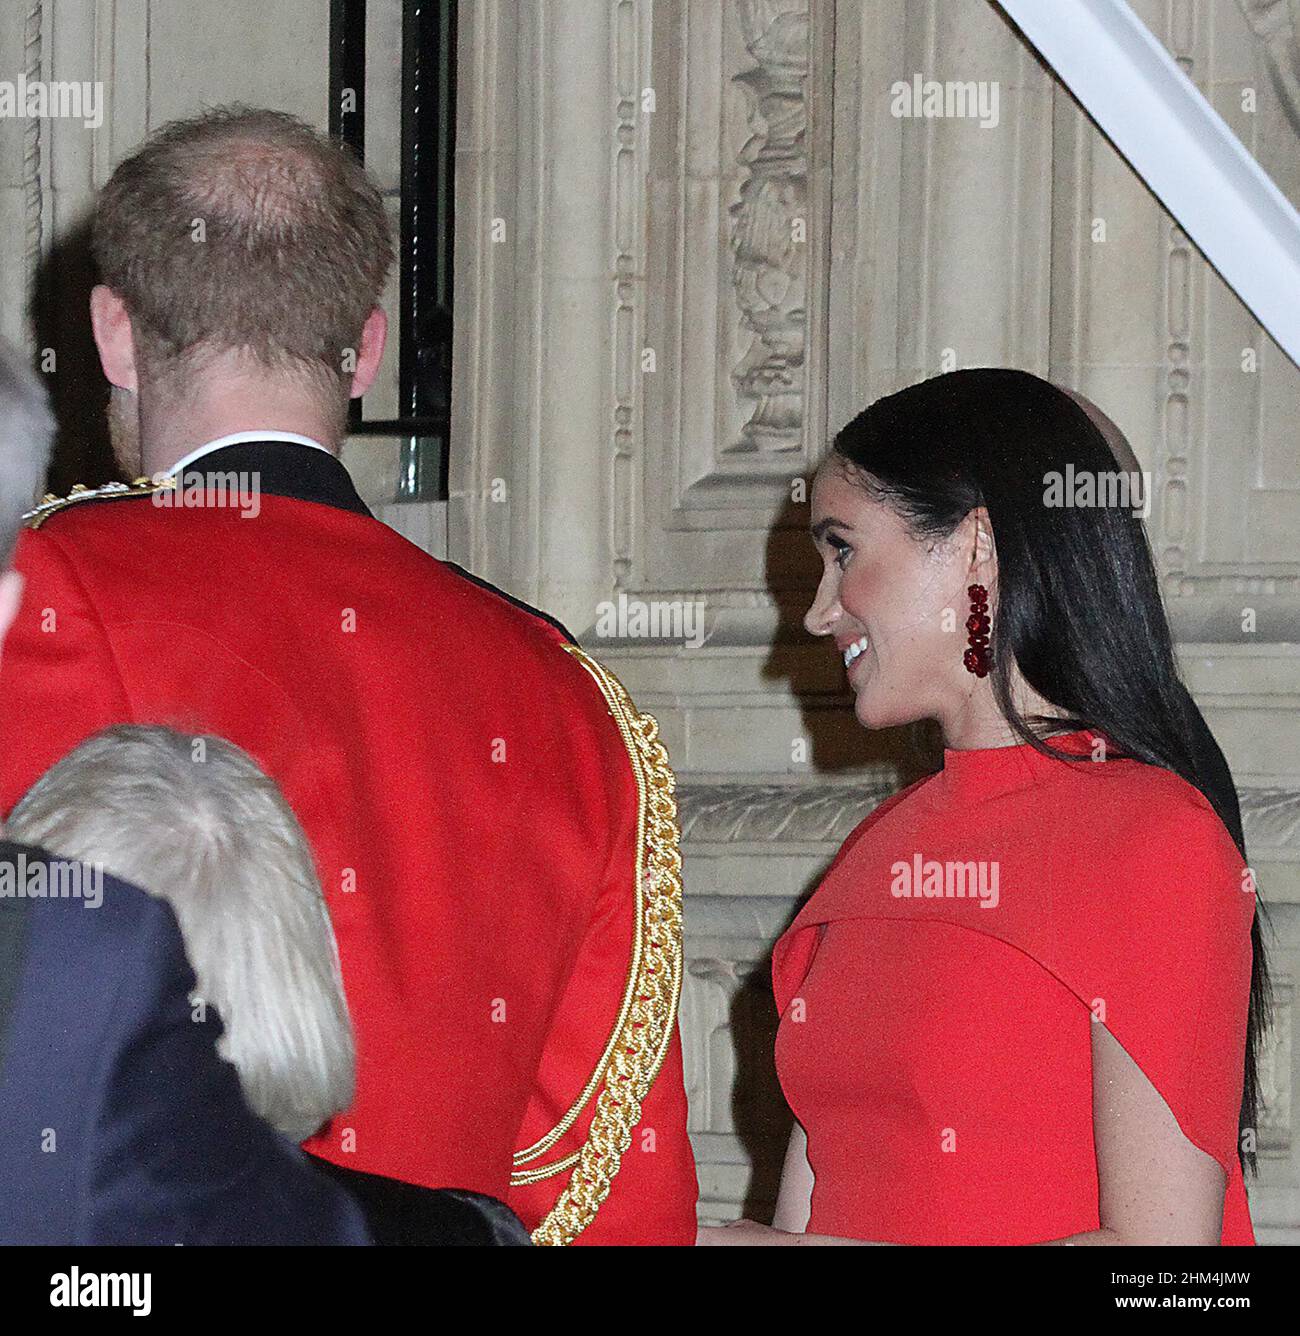 meghan markle and harry at the royal albert hall were he was wearing his army uniform as captain general for the last time.meghan looked very nice in that red dress and the said good bye to everyone before they speeded off to the palace 7/3/2020 Stock Photo